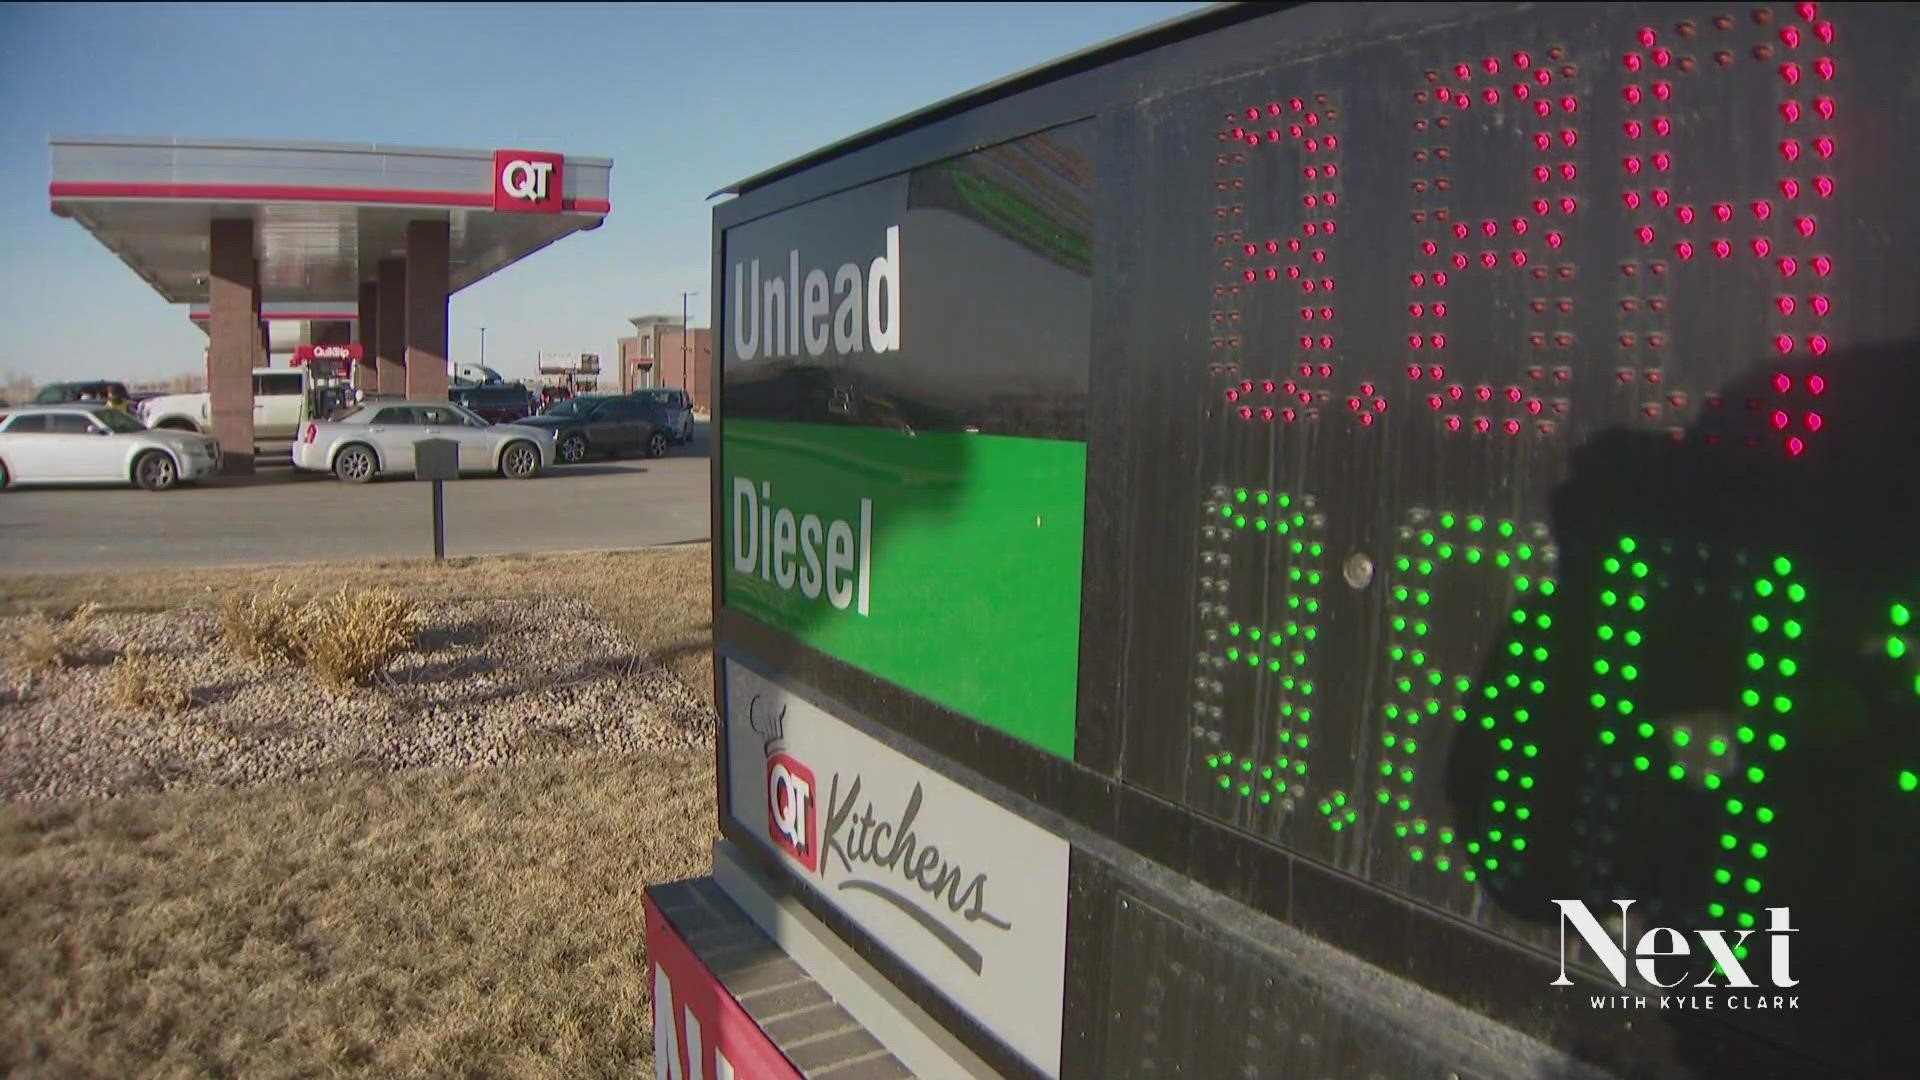 Colorado’s gas prices could recover after Suncor gets back to normal operations, which they've said could be in March. But that won't solve everything.